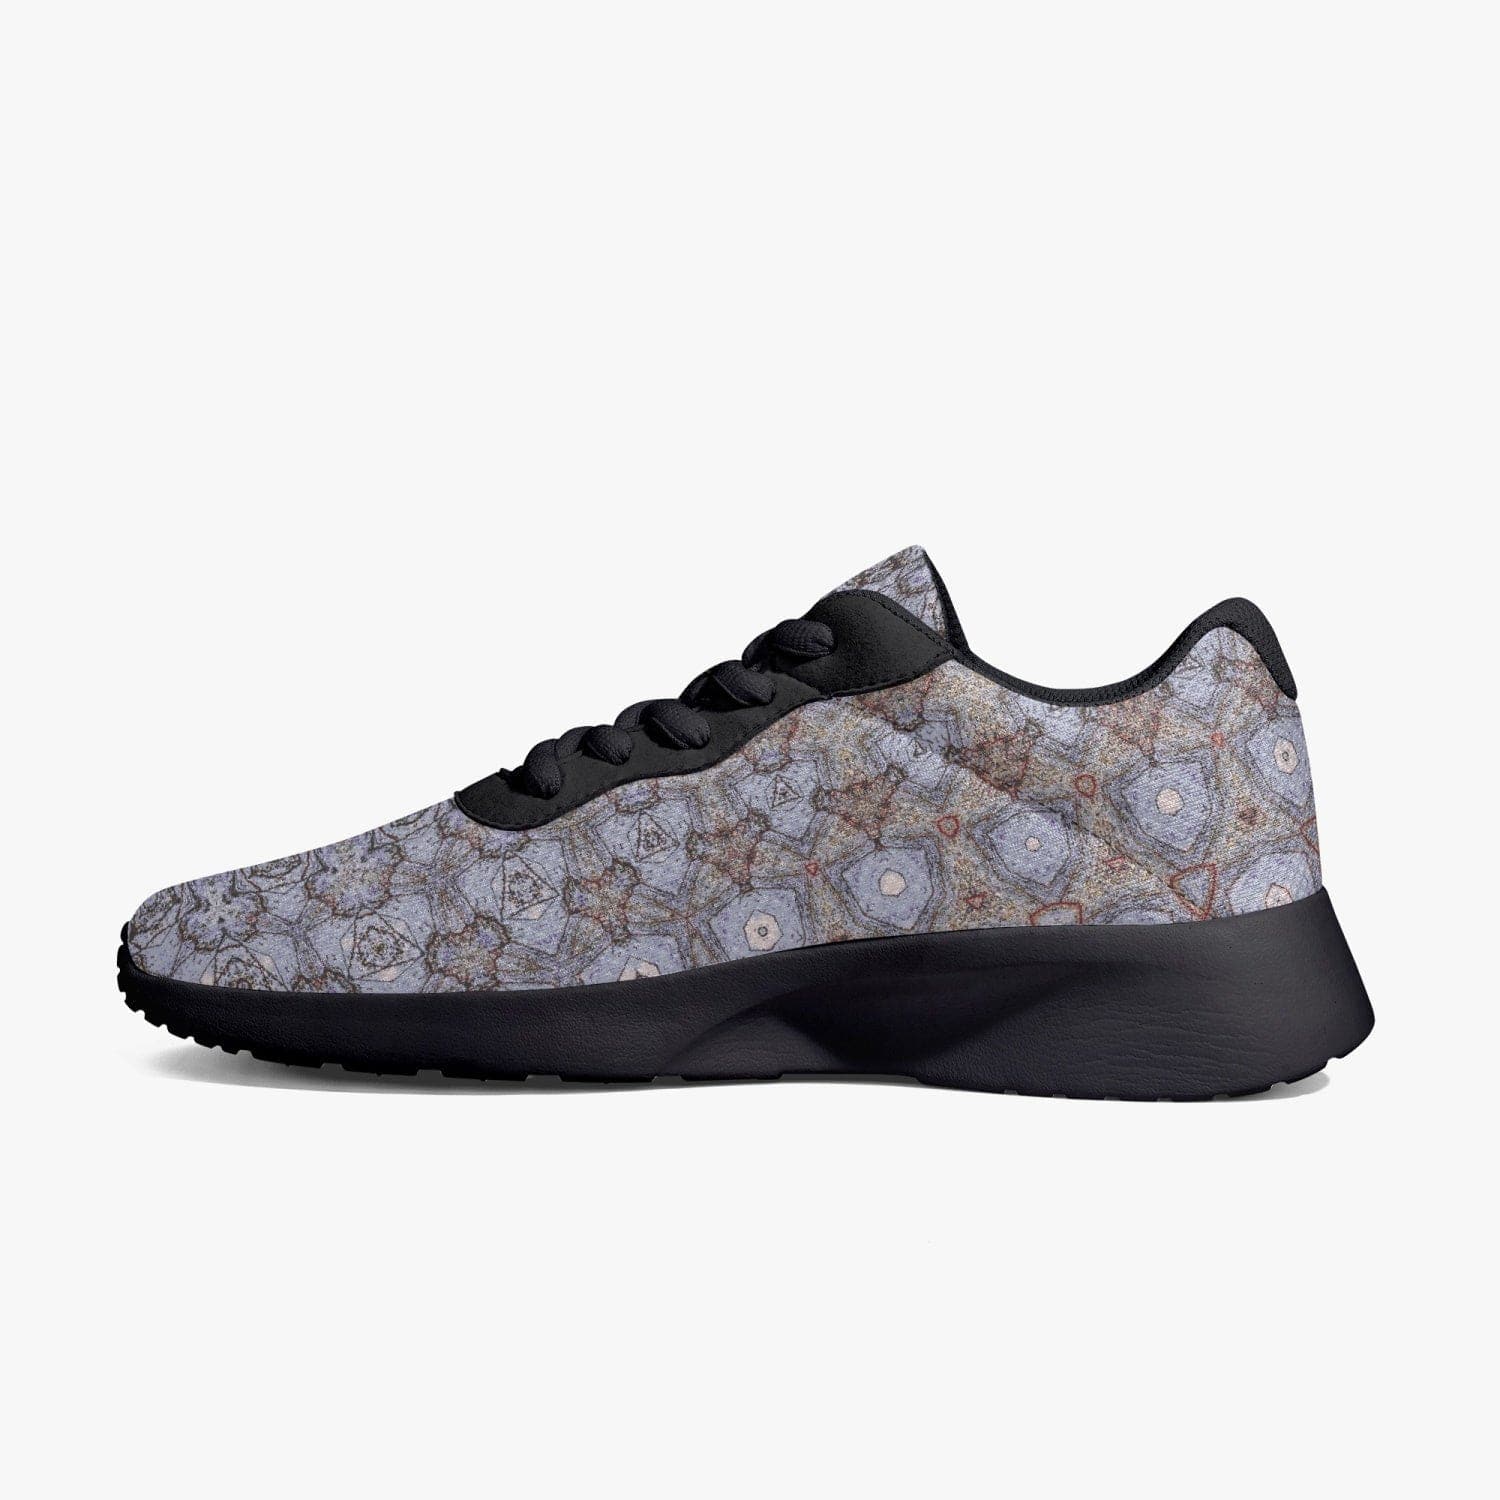 Sensus Design All Year Round Mauve Breathable Mesh Lifestyle Unisex Mesh Running Shoes for Daily Style or Outside Exercise (Black soles), designed by Sensus Studio Design